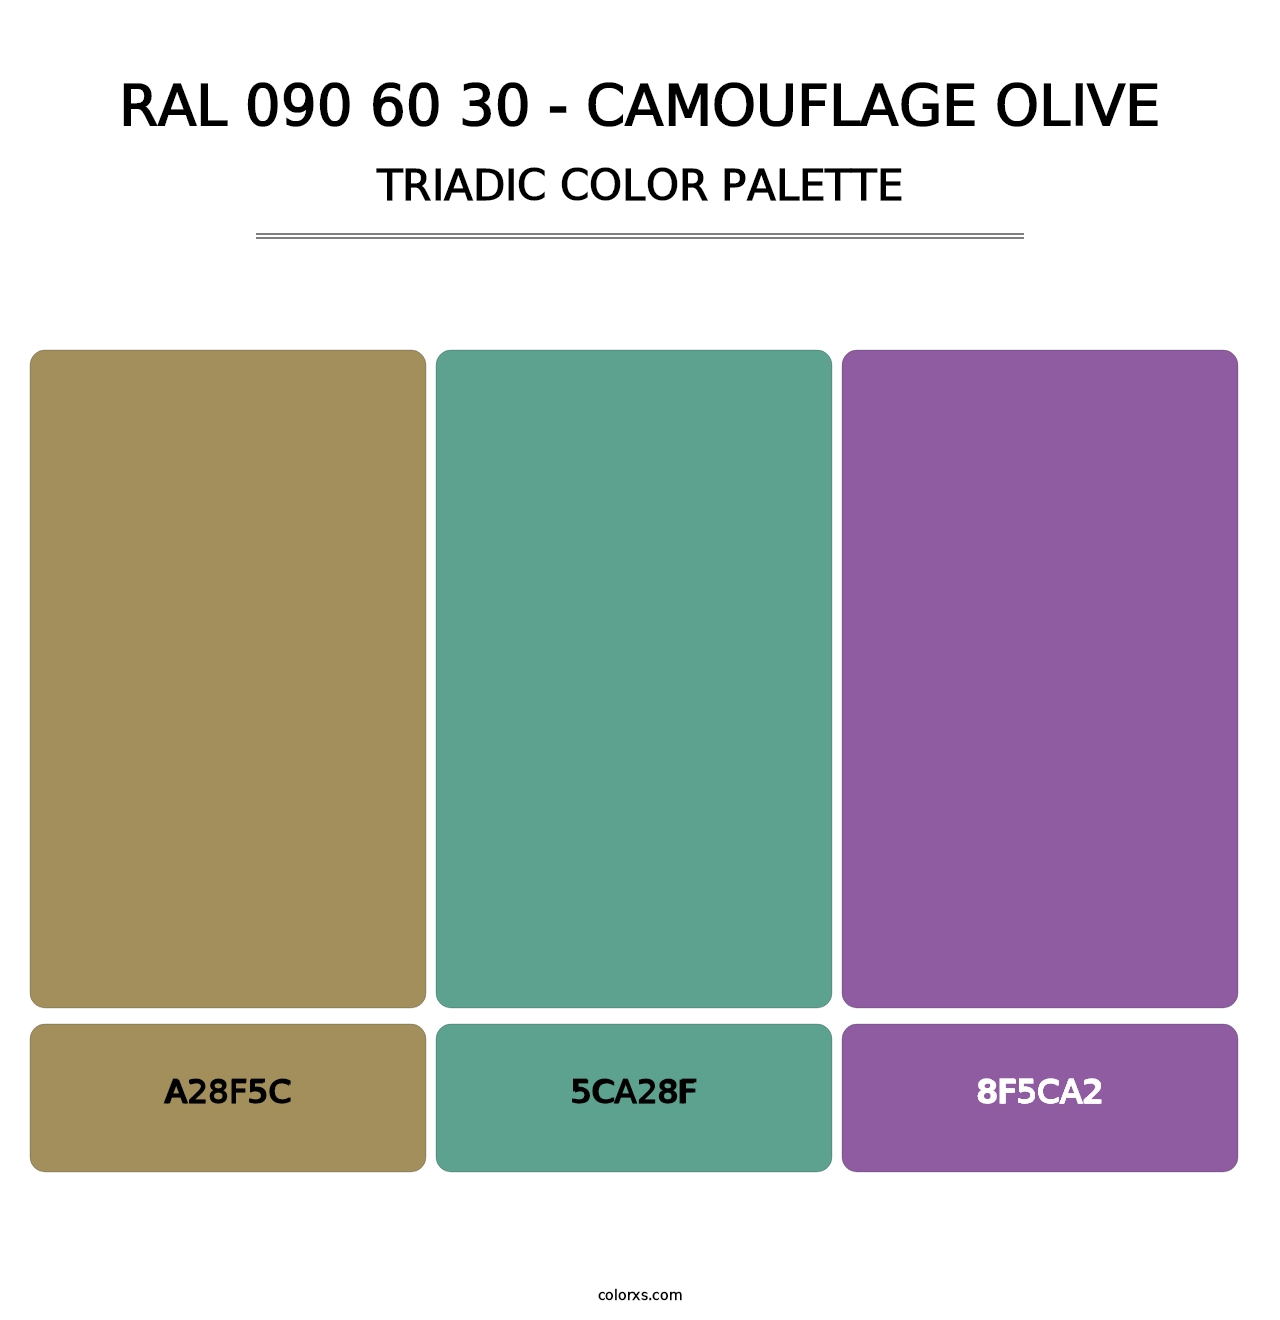 RAL 090 60 30 - Camouflage Olive - Triadic Color Palette